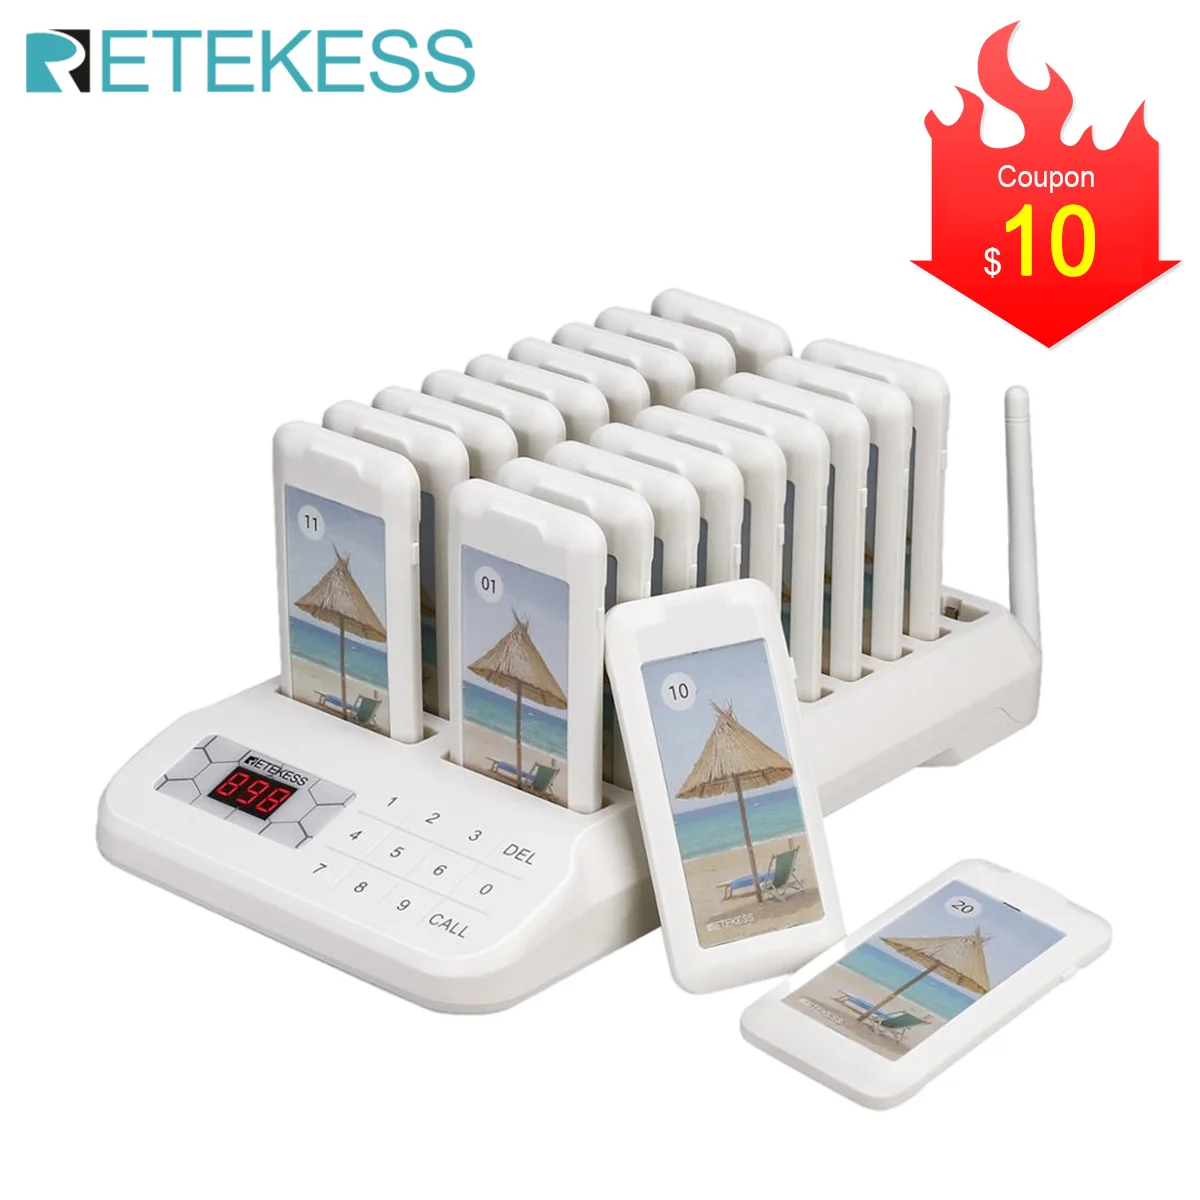 Retekess TD172 Restaurant Pager Calling Paging Queuing System 20 Coaster Beeper Buzzers For Cafe Food Court Clinic Beauty Salon